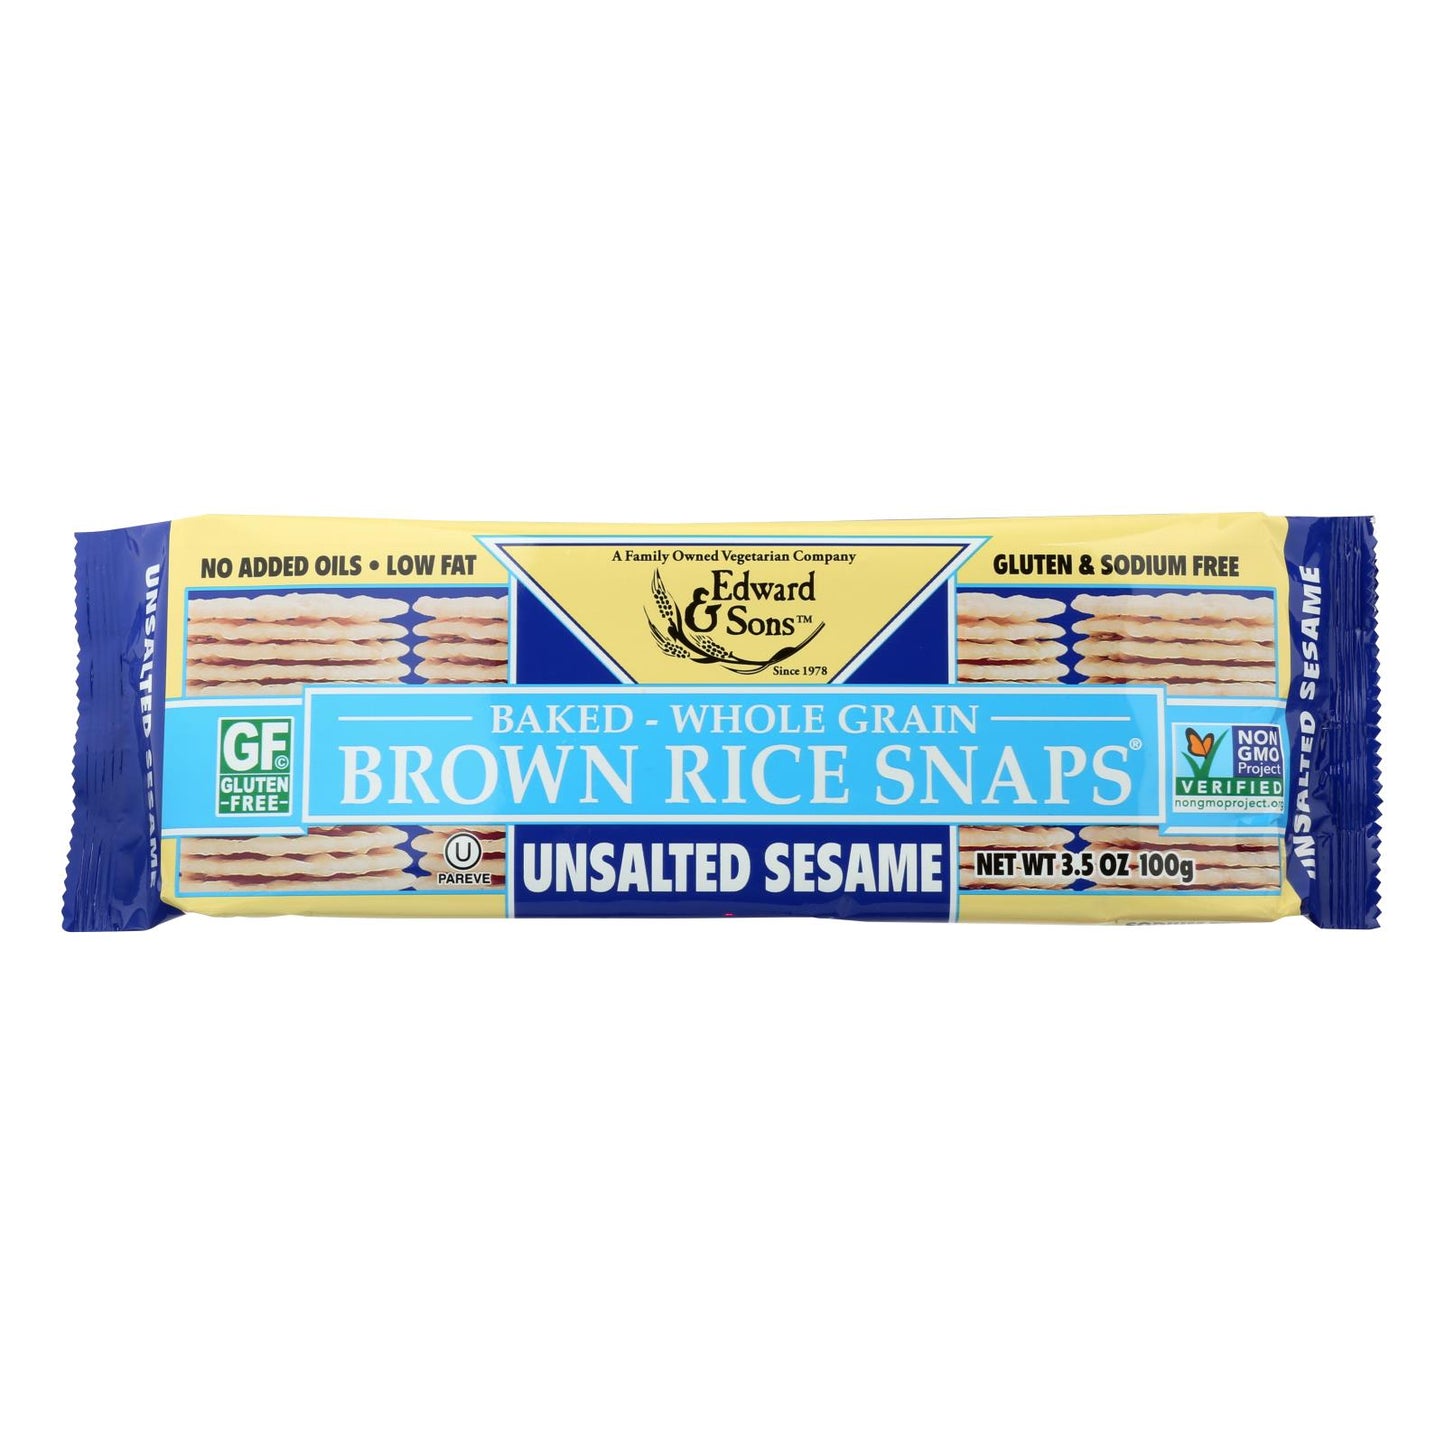 Edward And Sons Brown Rice Snaps - Unsalted Sesame - Case Of 12 - 3.5 Oz.